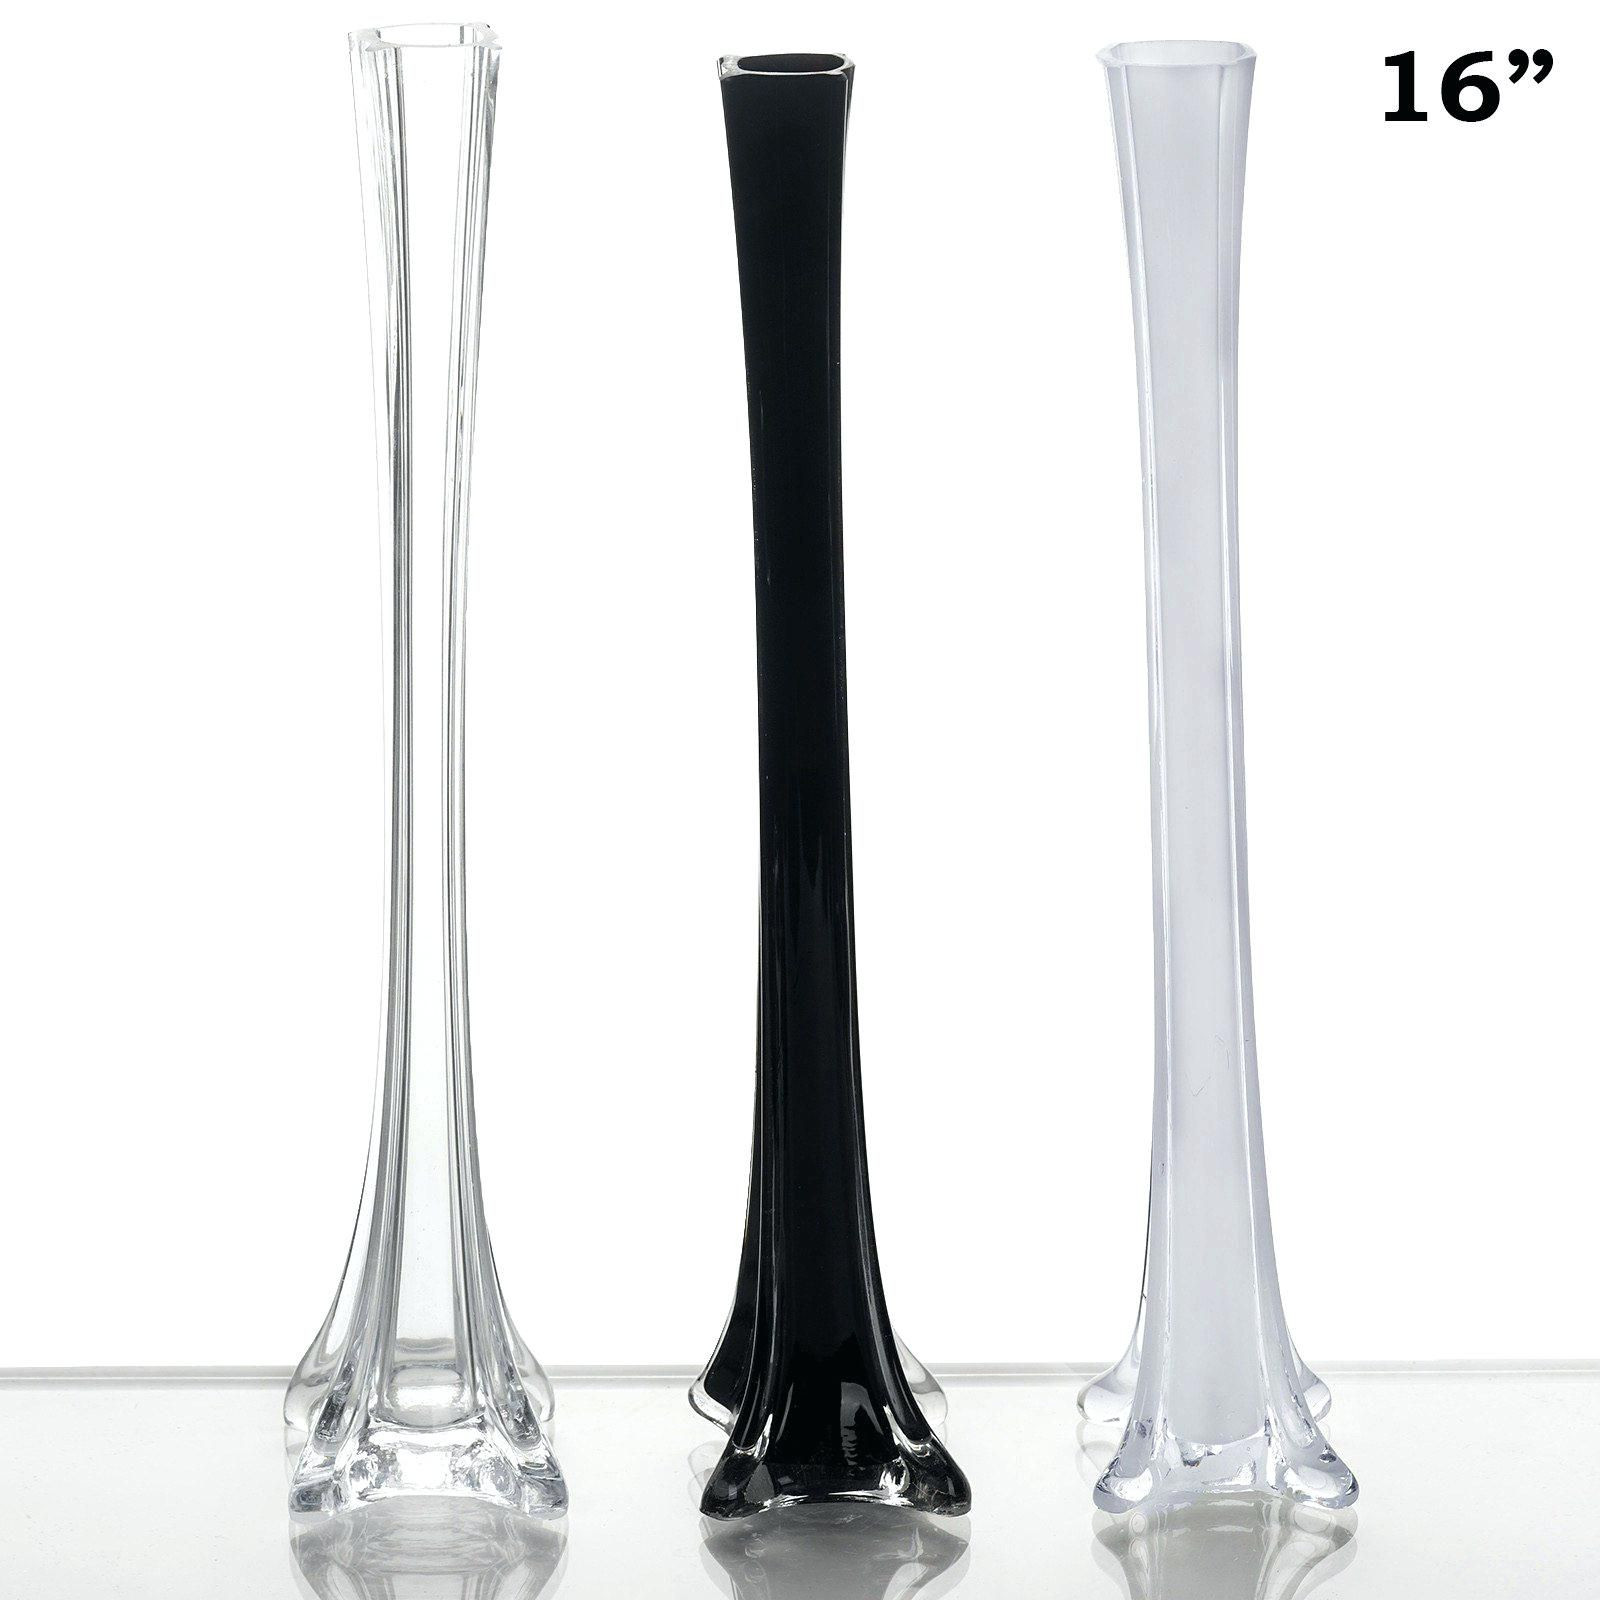 30 attractive wholesale Bulk Glass Vases 2024 free download wholesale bulk glass vases of 40 glass vases bulk the weekly world within gallery plastic eiffel tower vases wholesale drawings art gallery